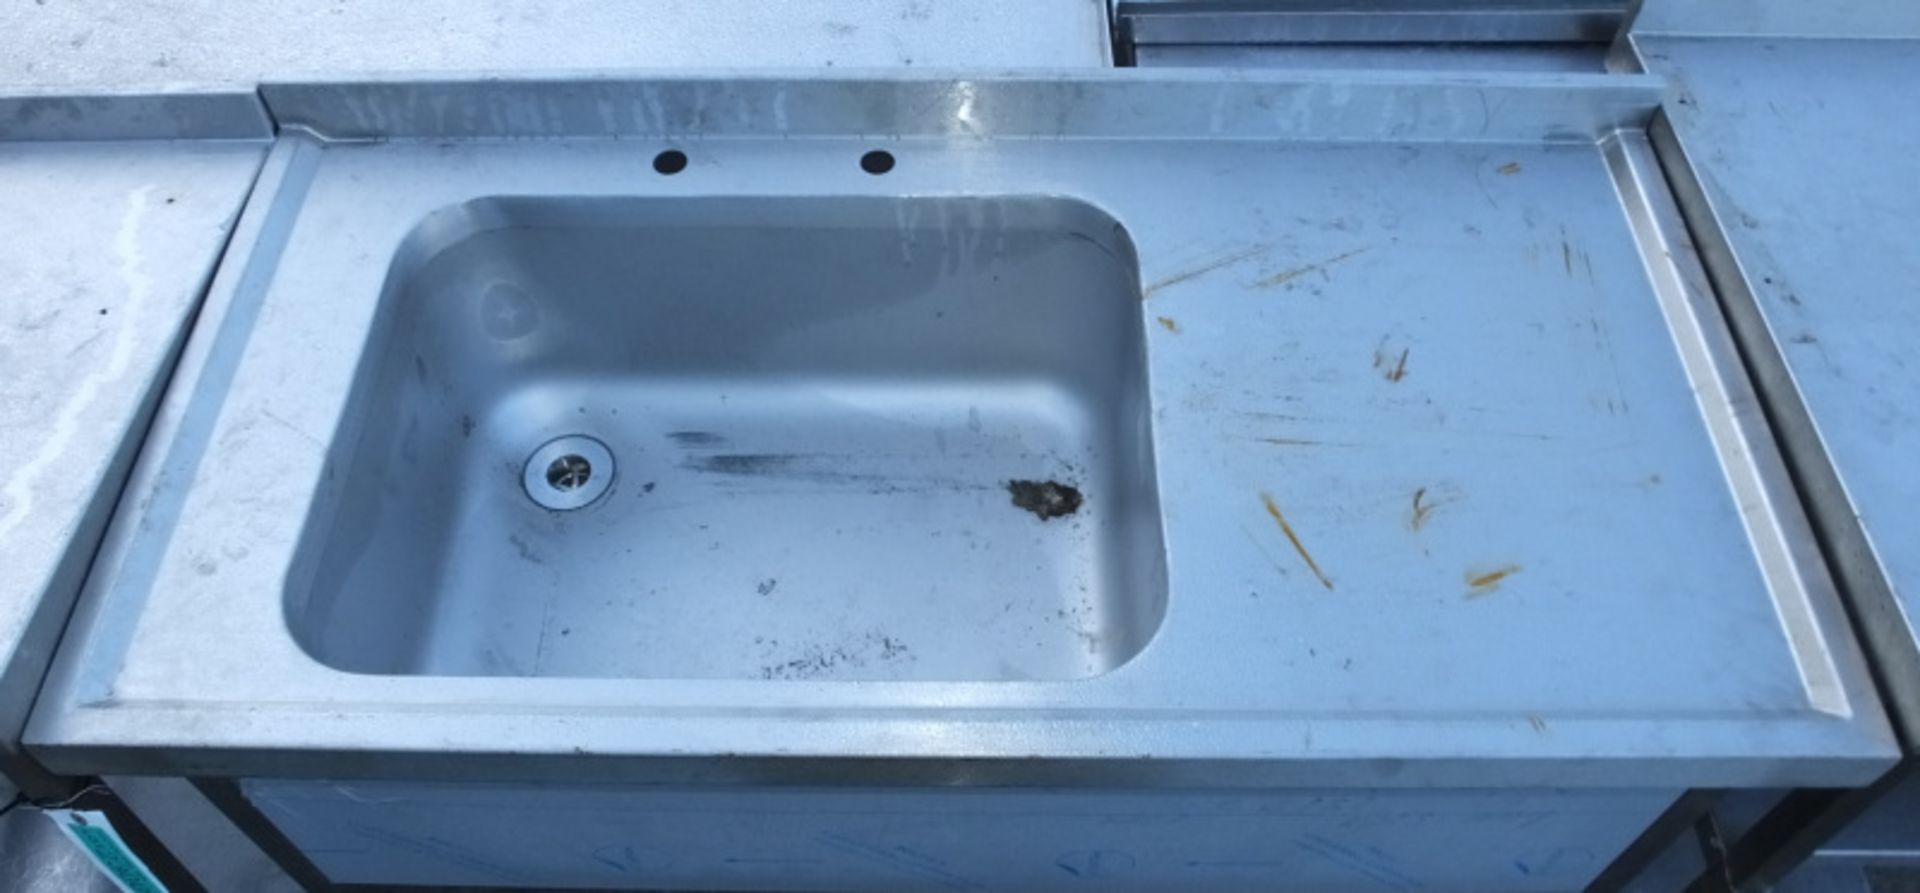 Stainless Steel Sink Unit Without Tap L 1200mm x W 600mm x H 900mm - Image 2 of 2